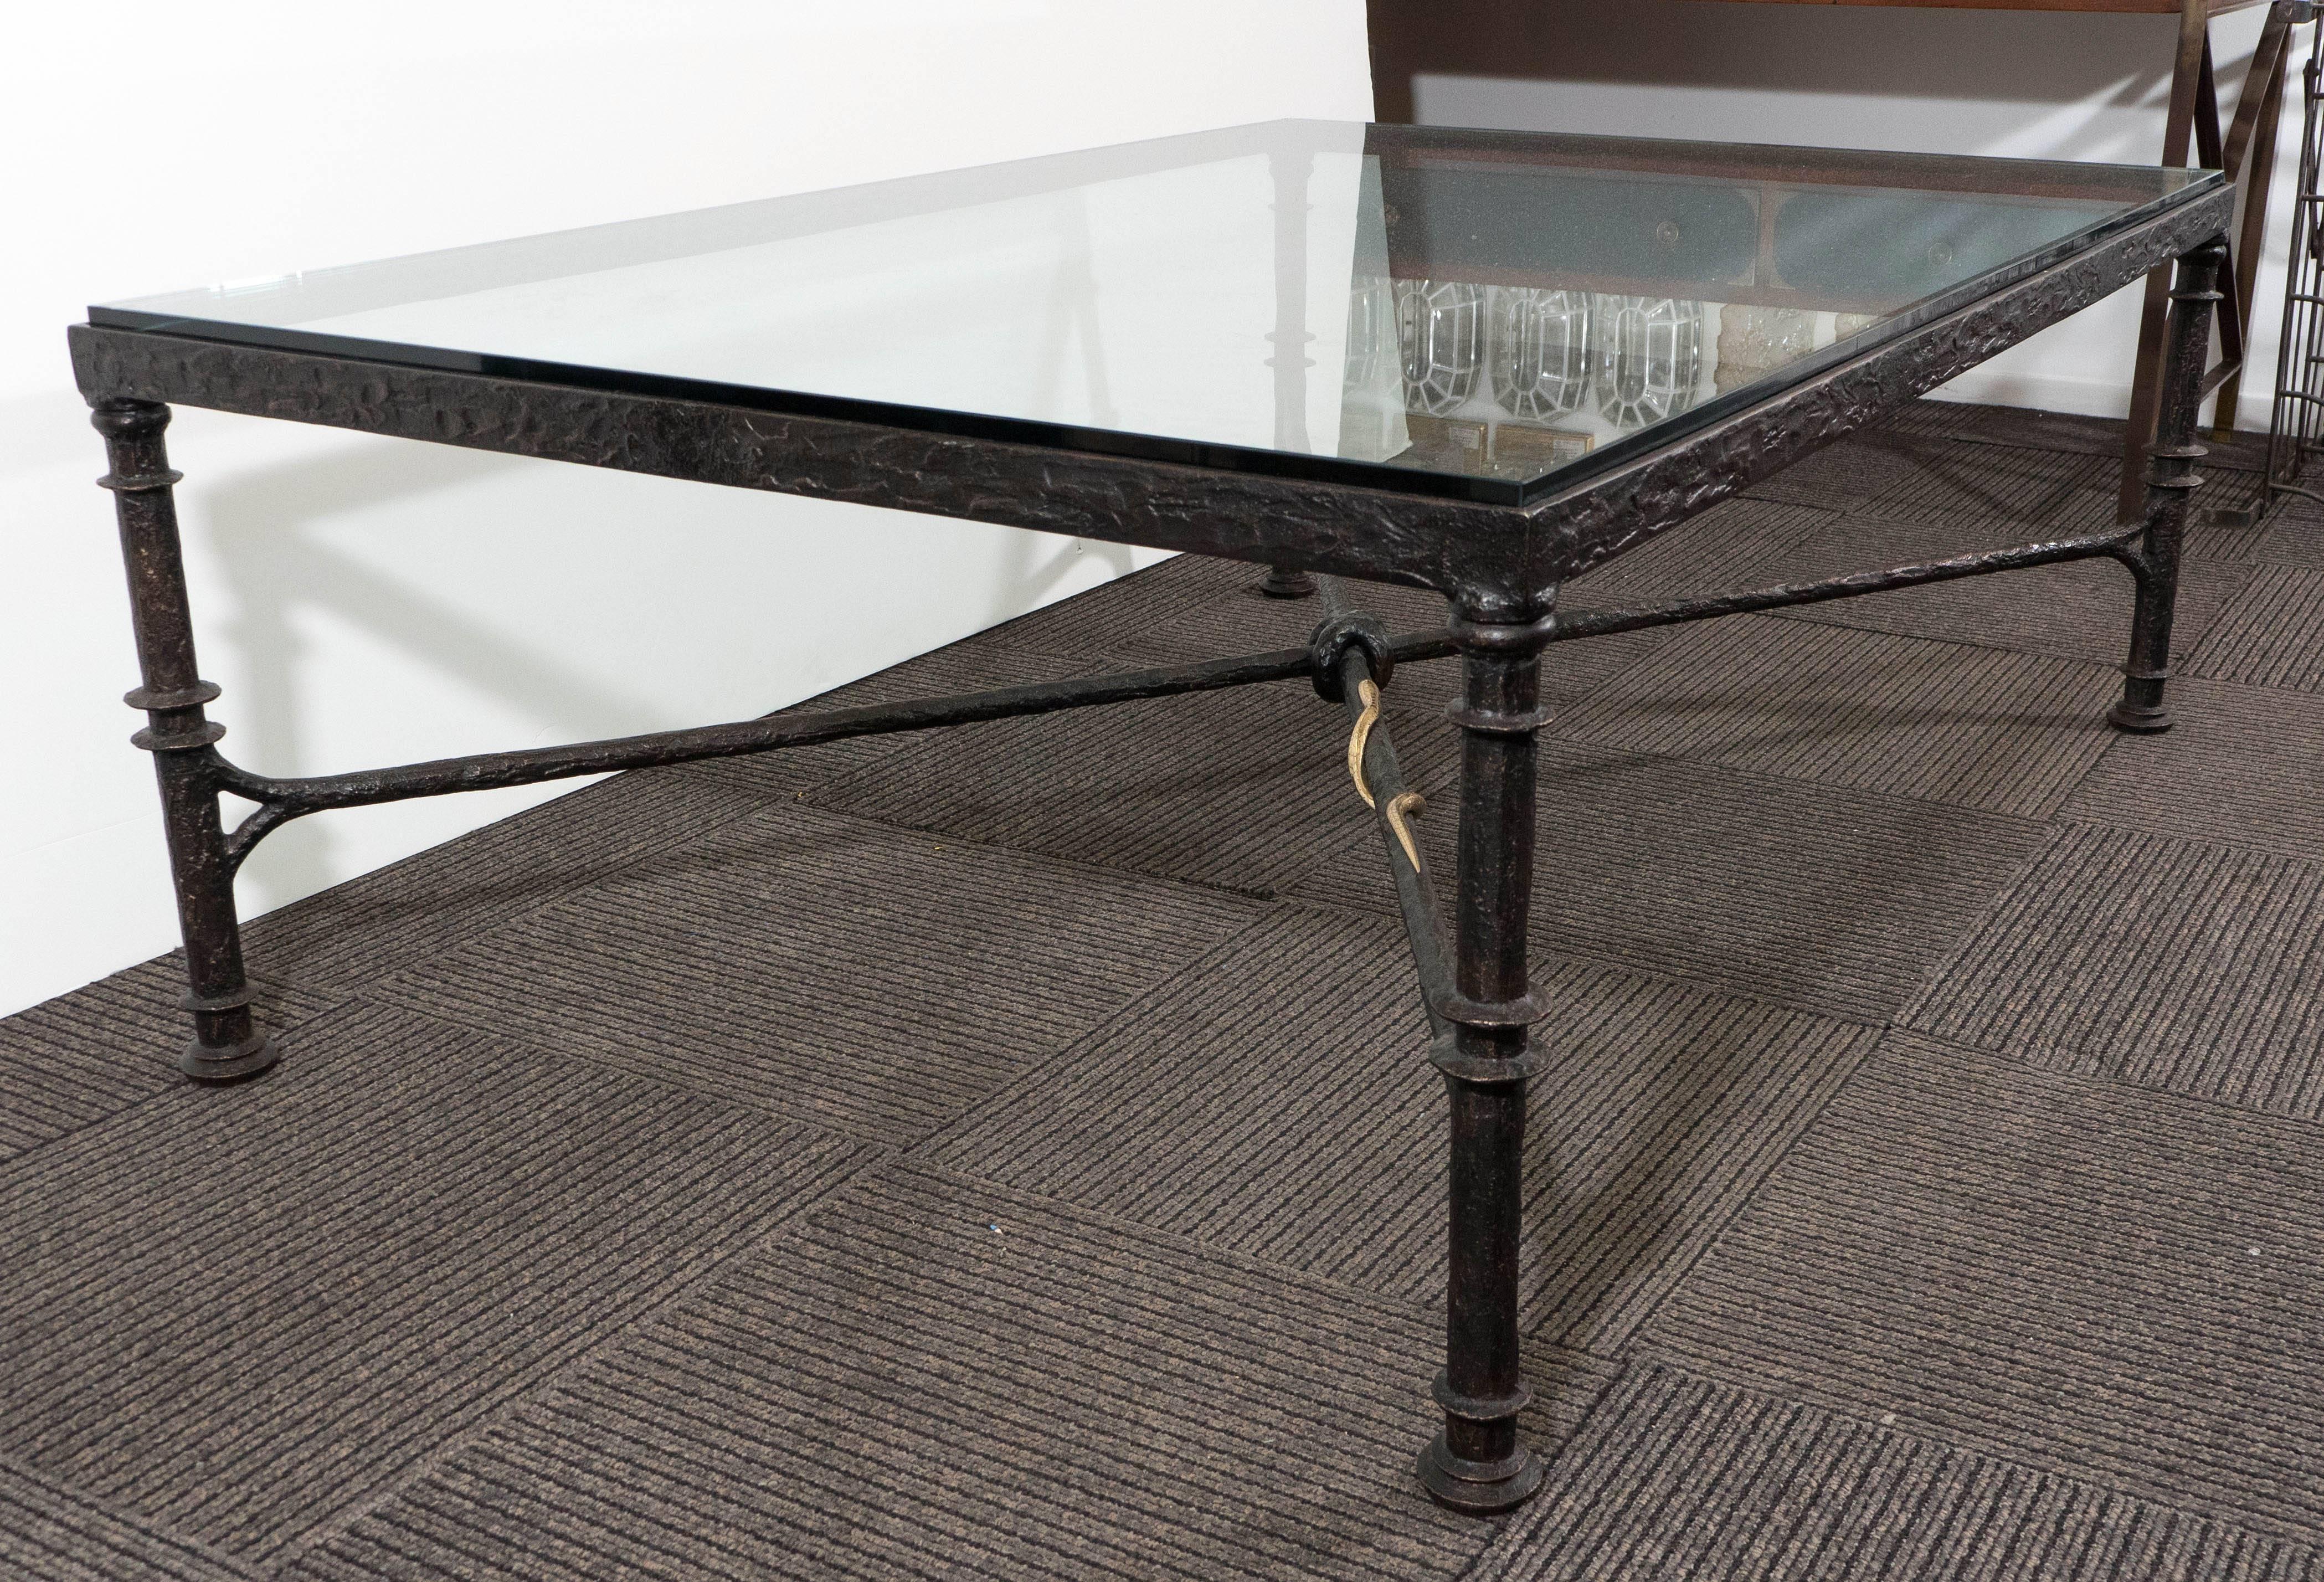 Christopher Chodoff ‘Etruscan’ Coffee Table in Cast Bronze with Gold-Toned Snake 4